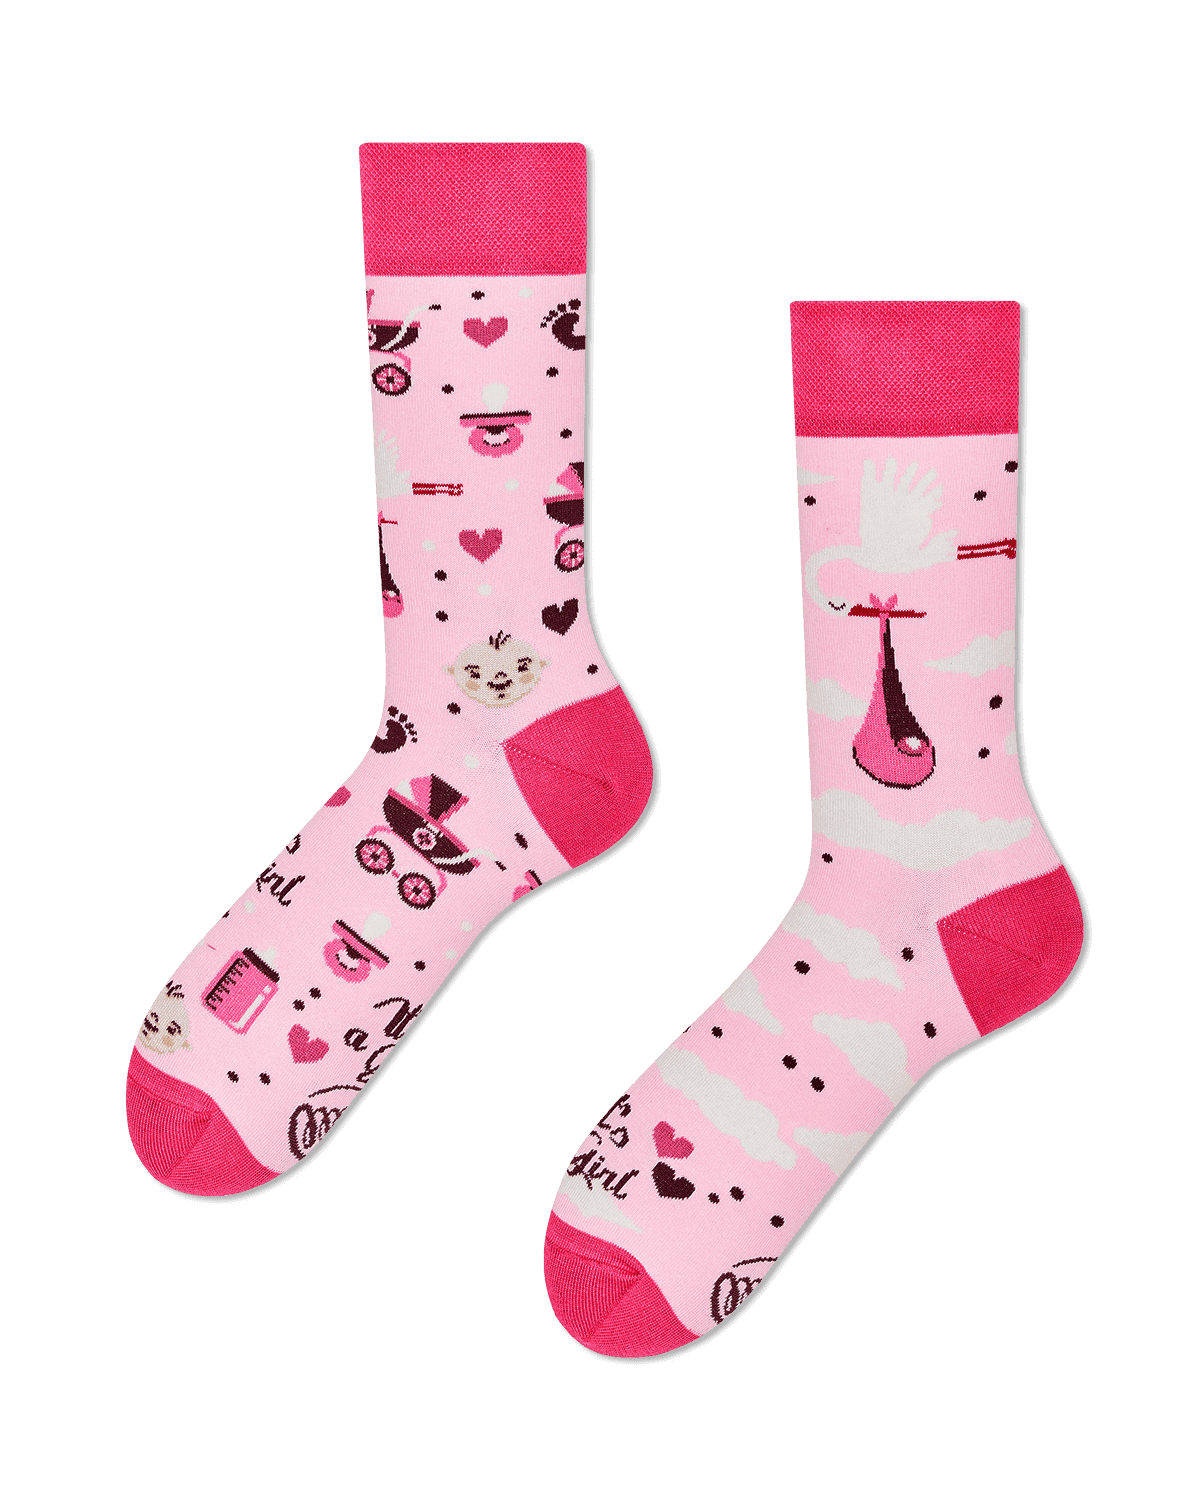 IT'S A GIRL - Calcetines para Gender Reveal